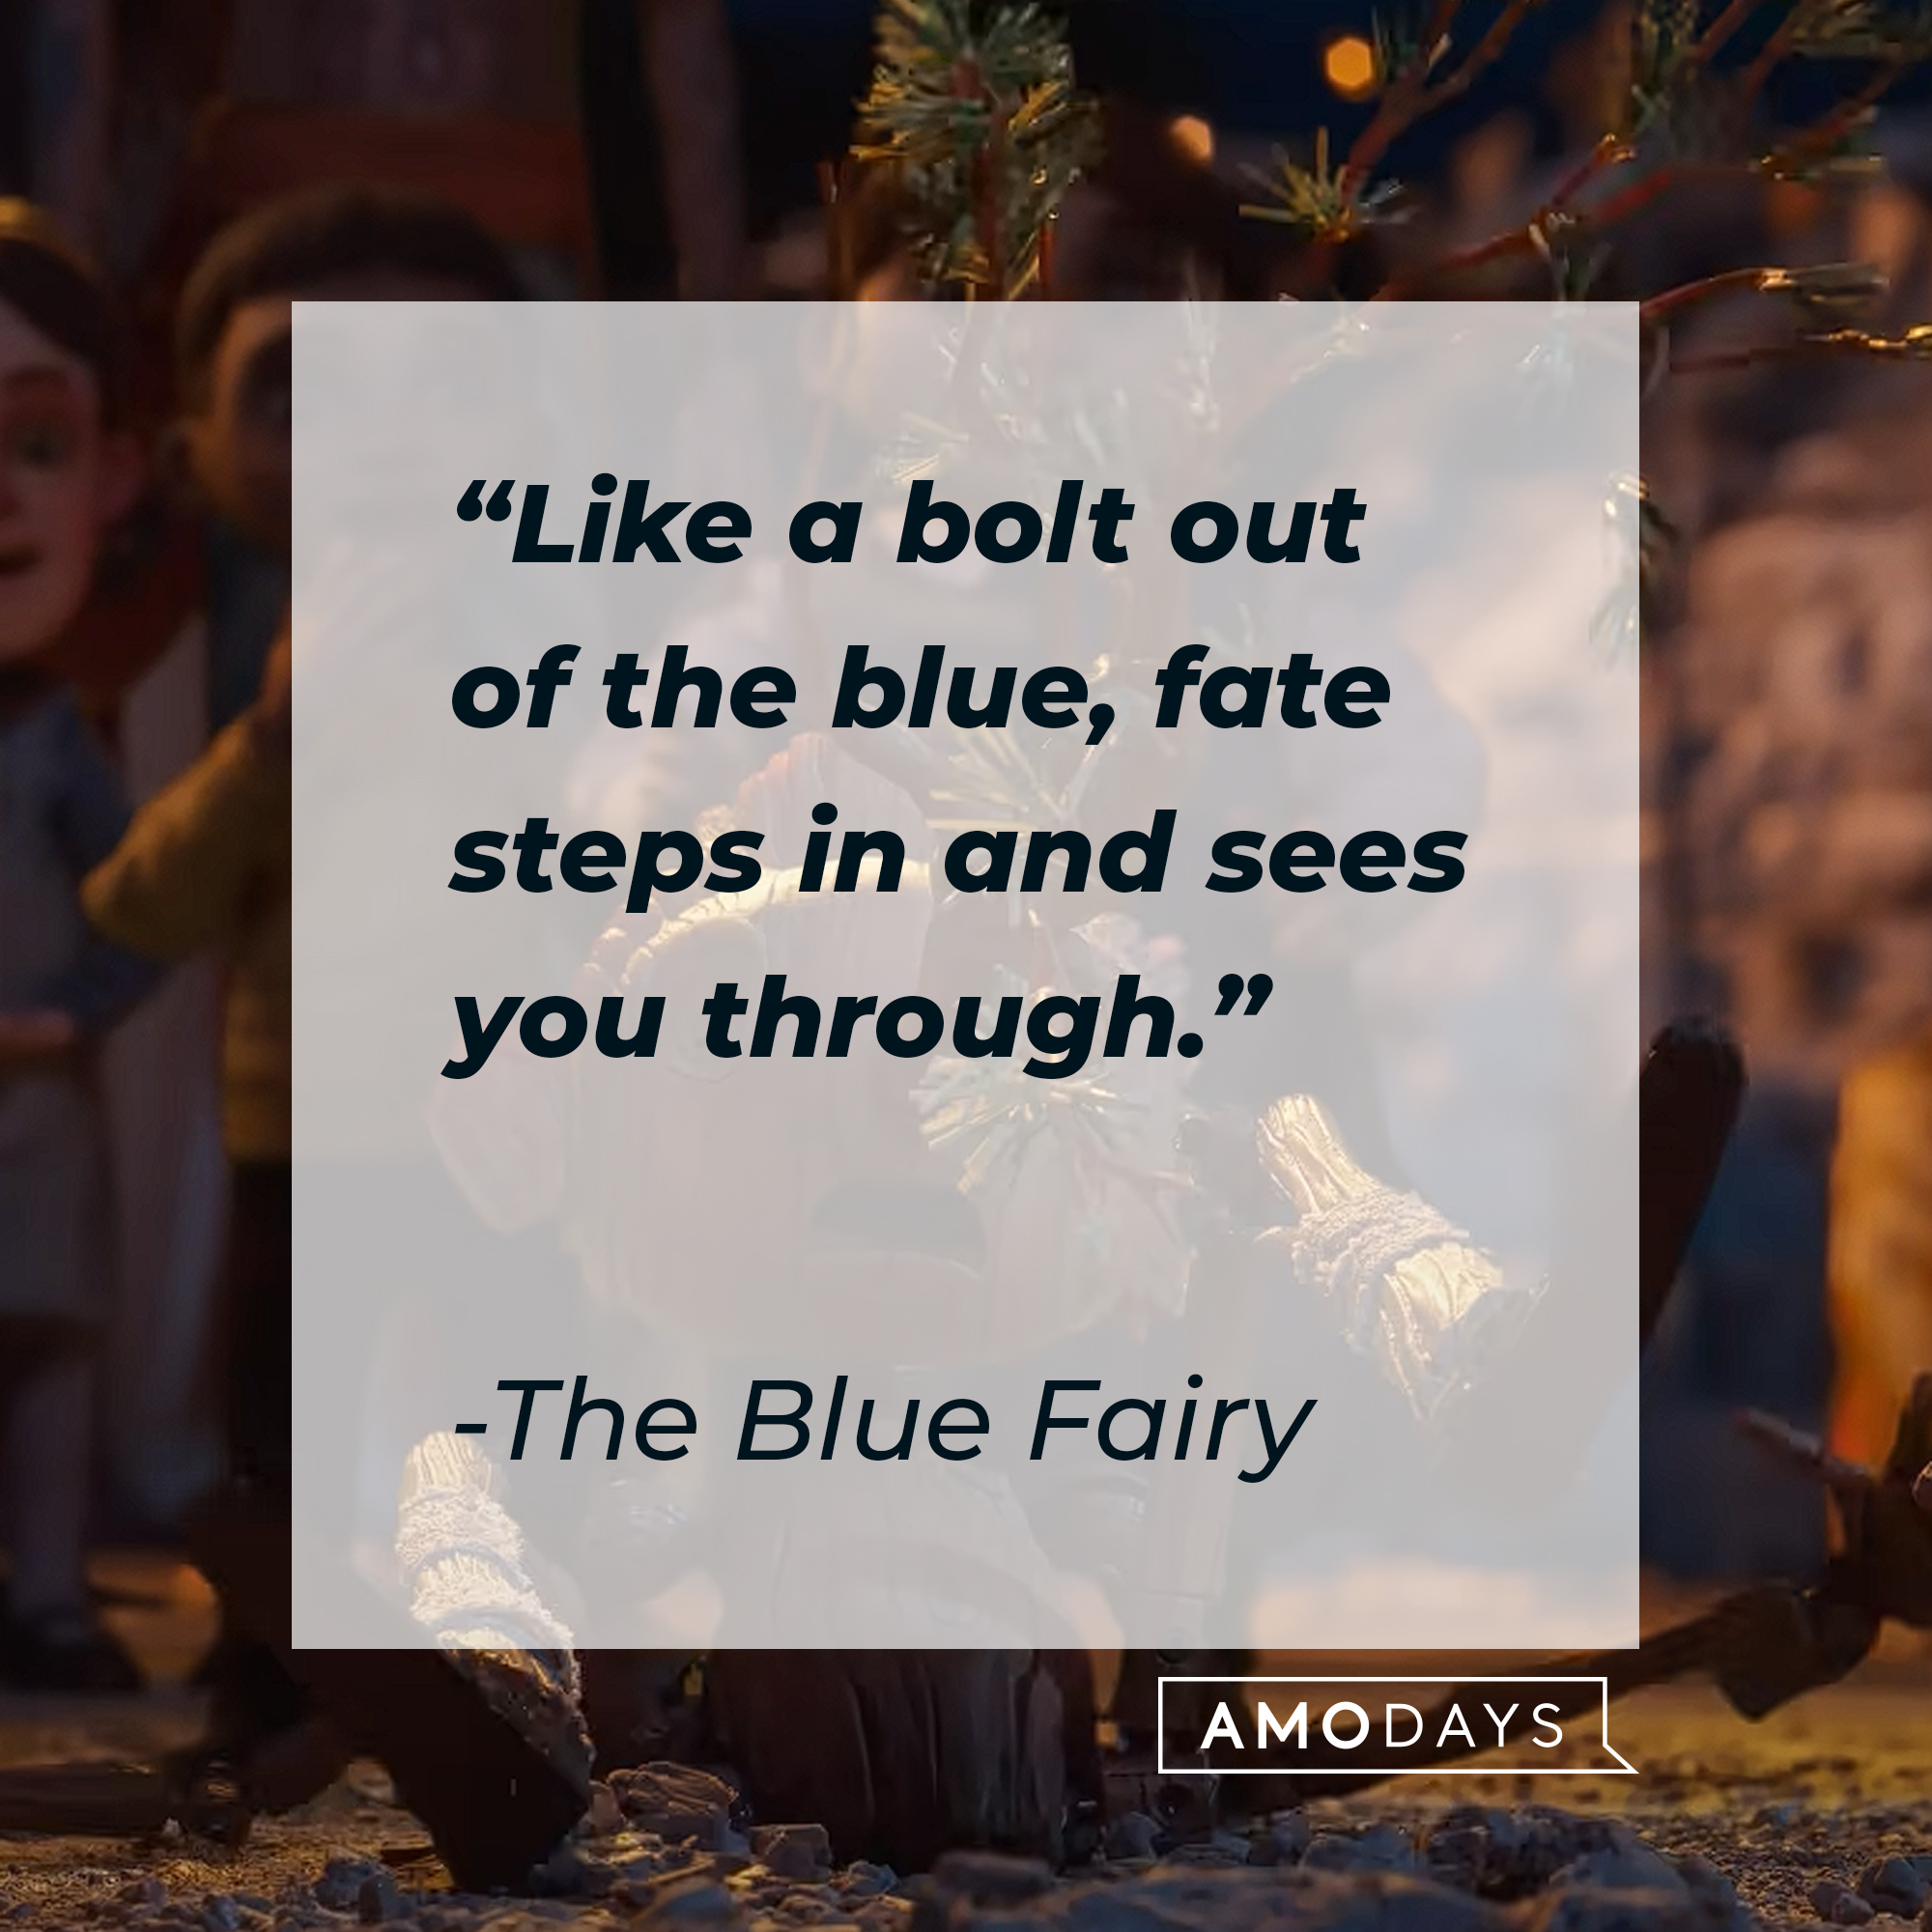 The Blue Fairy's quote: "Like a bolt out of the blue, fate steps in and sees you through." | Image: AmoDays